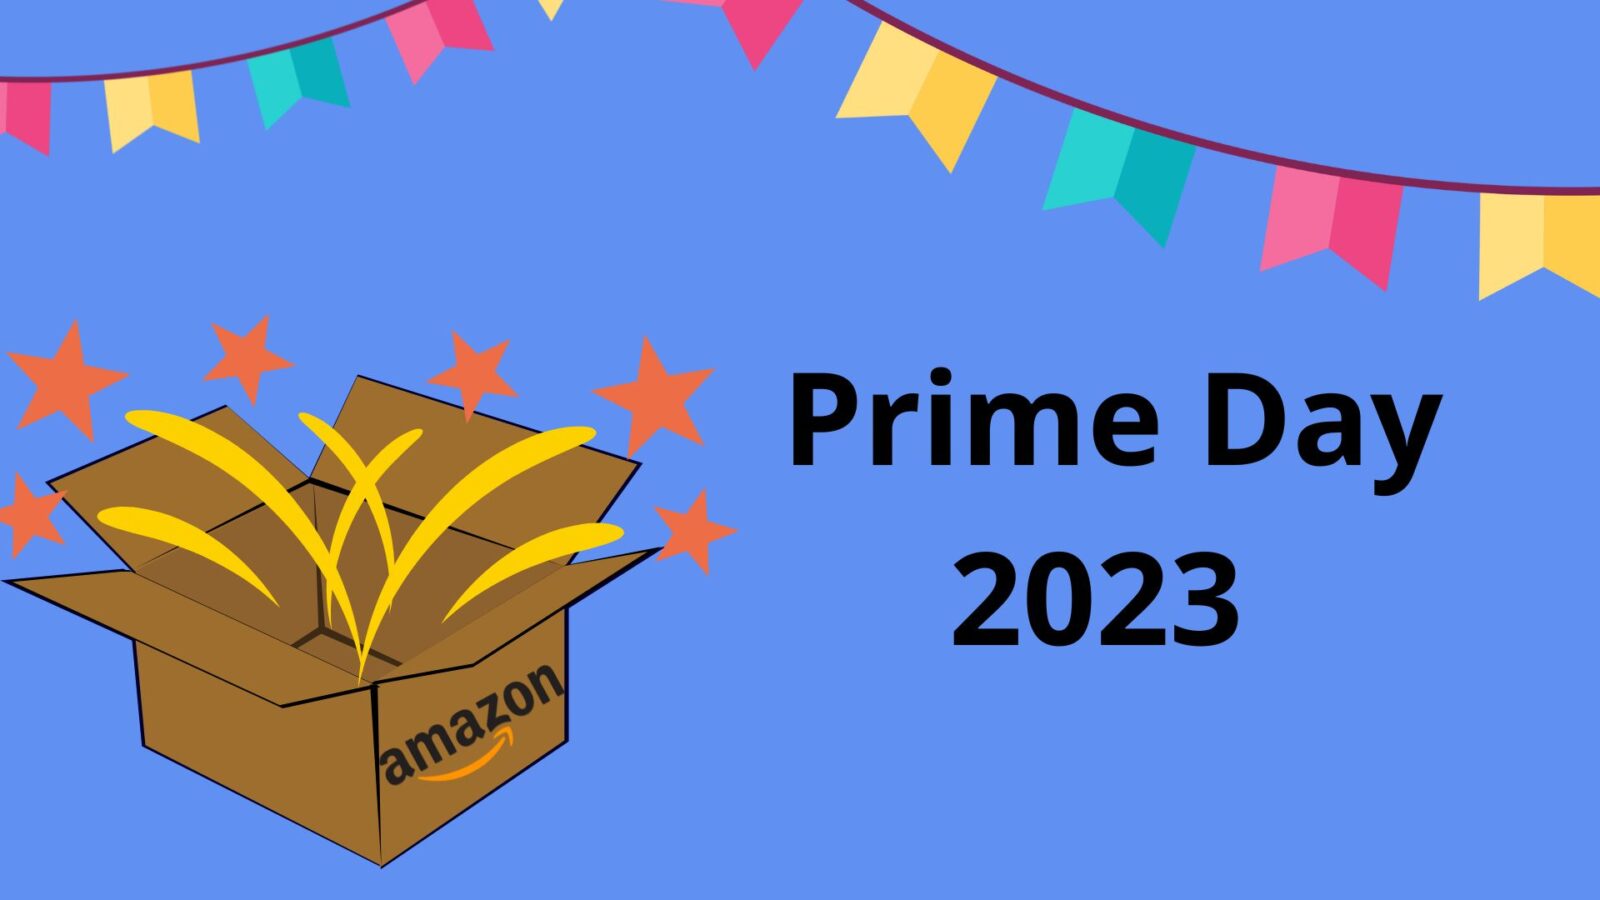 Preparing for the most important event of 2023. Everything you need to know about Prime Day on Amazon